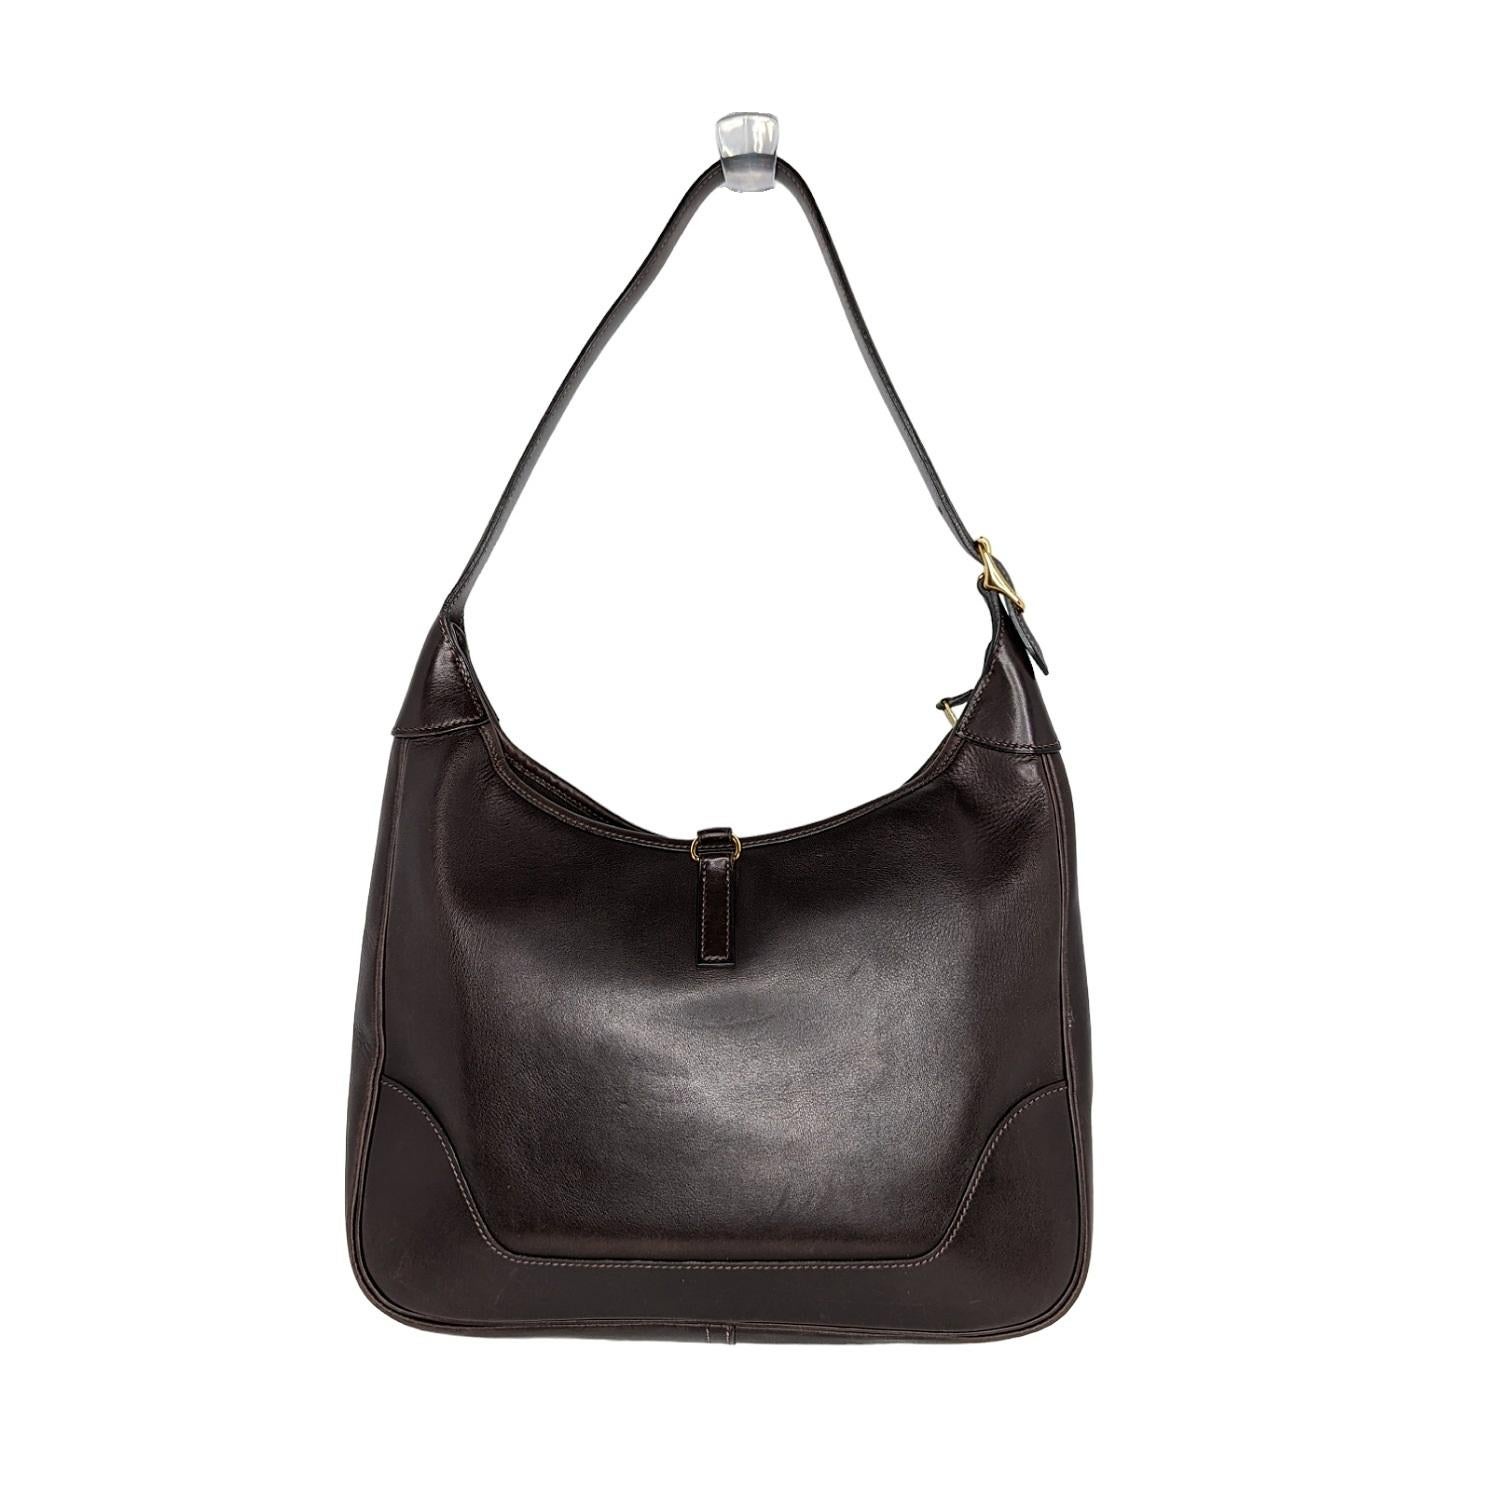 This stylish shoulder bag is crafted of textured box Calf leather in dark brown. The bag features a looping leather shoulder strap with a cross-over strap and a polished gold-tone clasp lock. The inside of the Trim is a pretty free space, with one